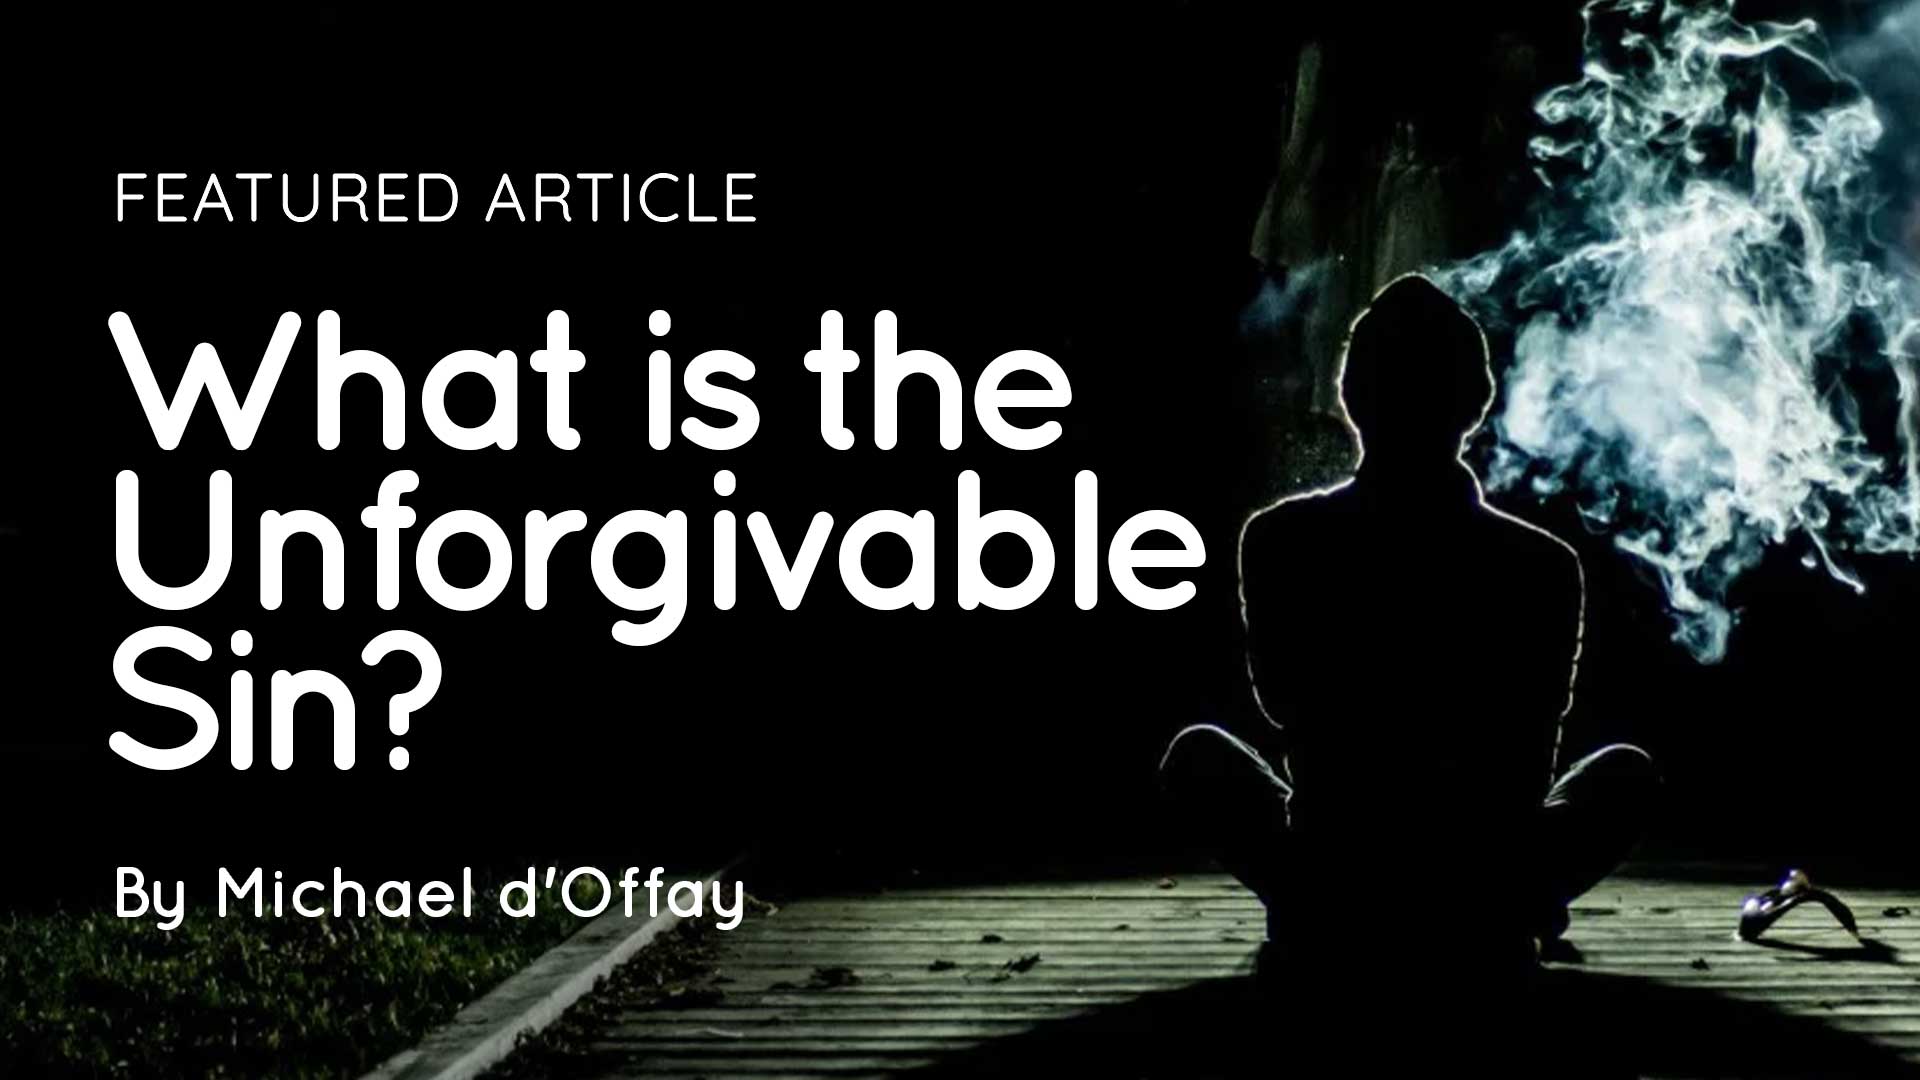 What-is-the-Unforgivable-Sin_1920x1080